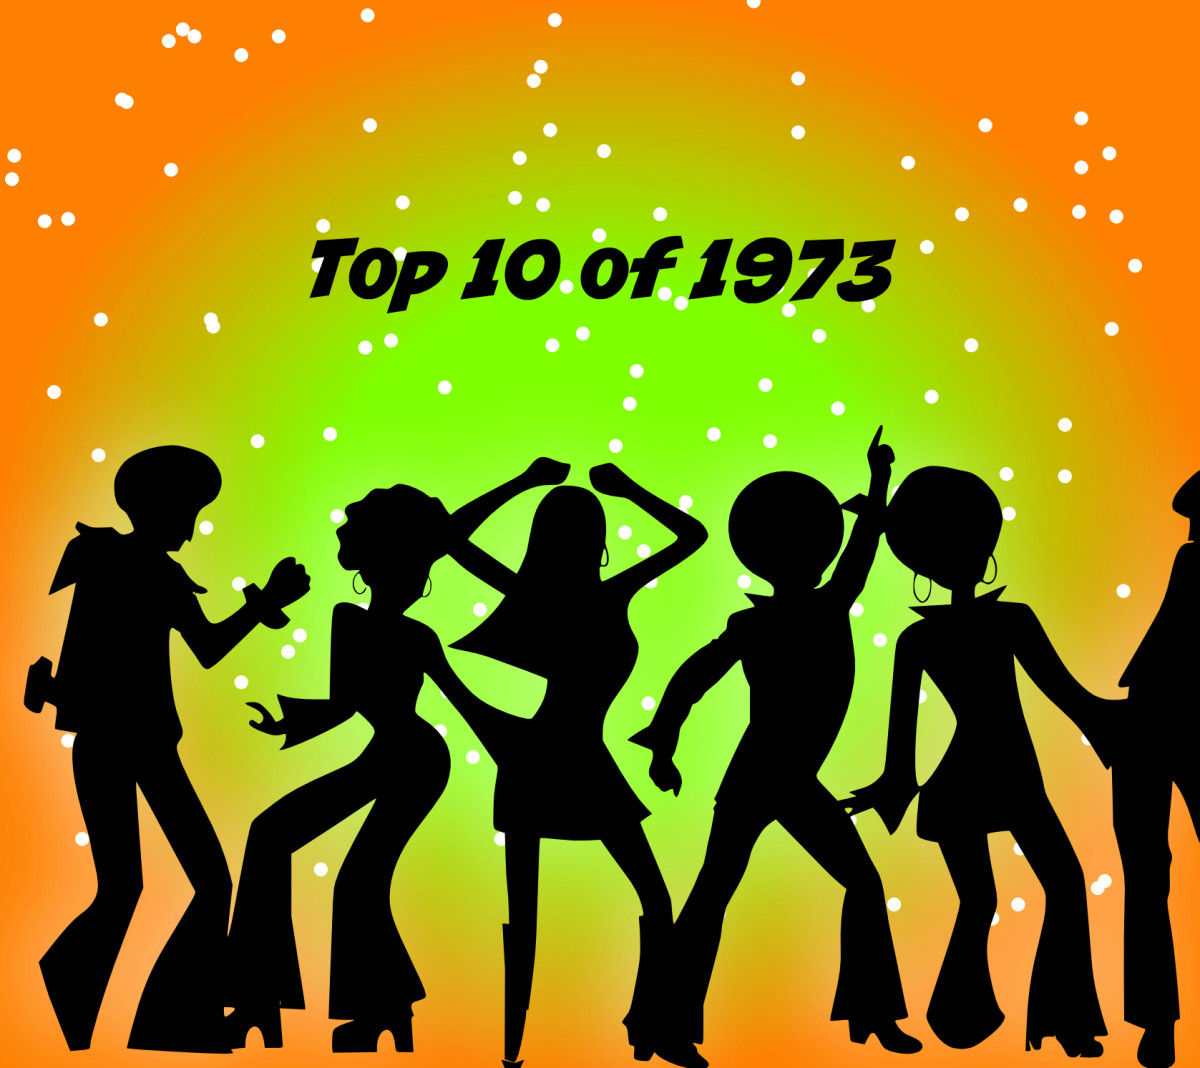 The Top 10 Songs of 1973 in the UK